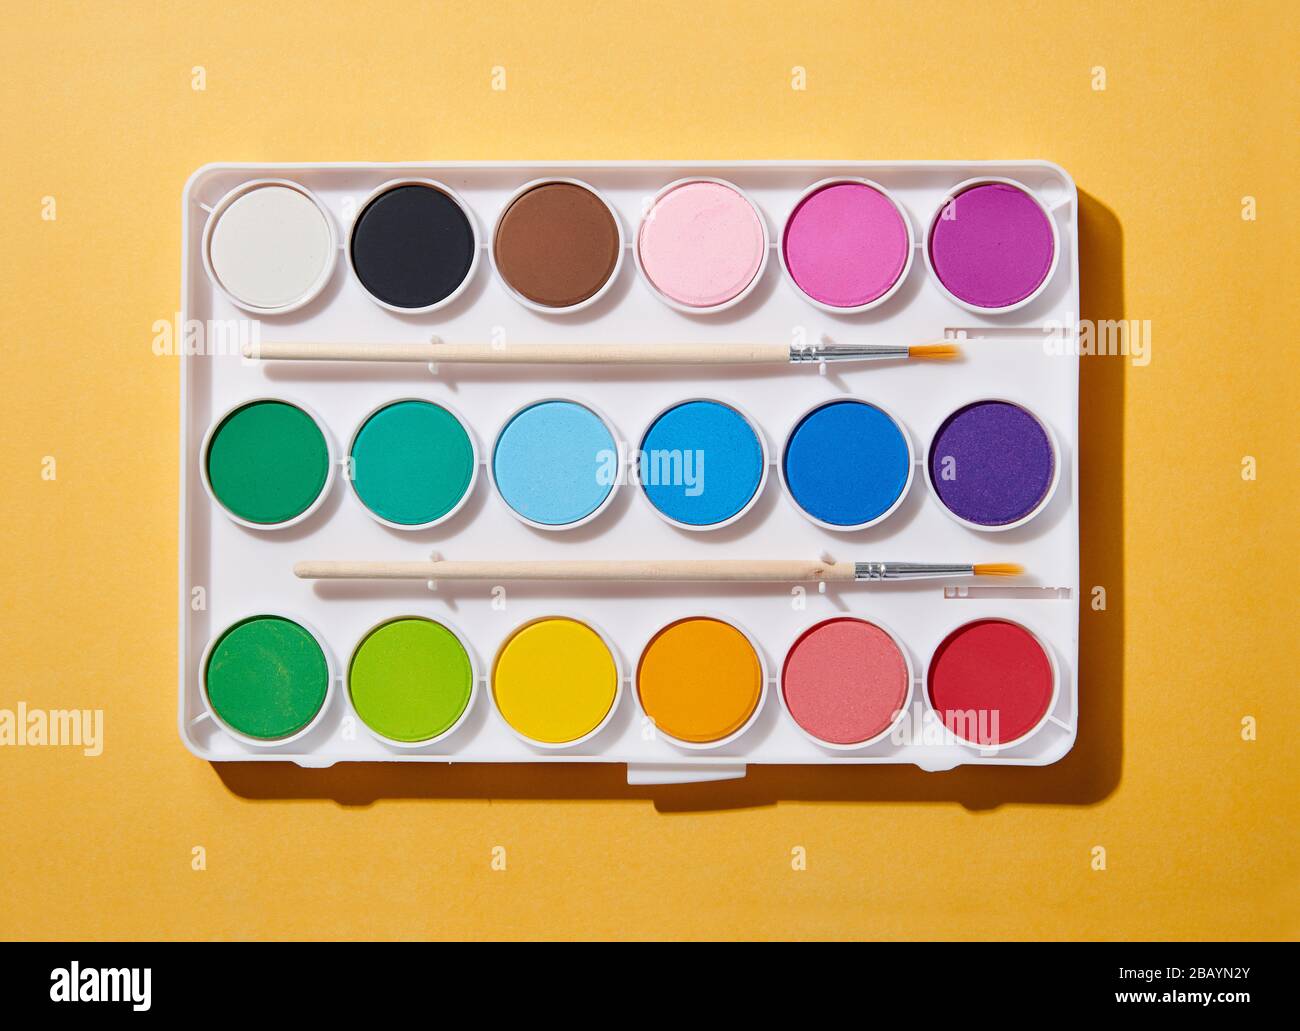 Open new watercolor paint box with two brushes and rainbow colored paints viewed from above on an orange background Stock Photo